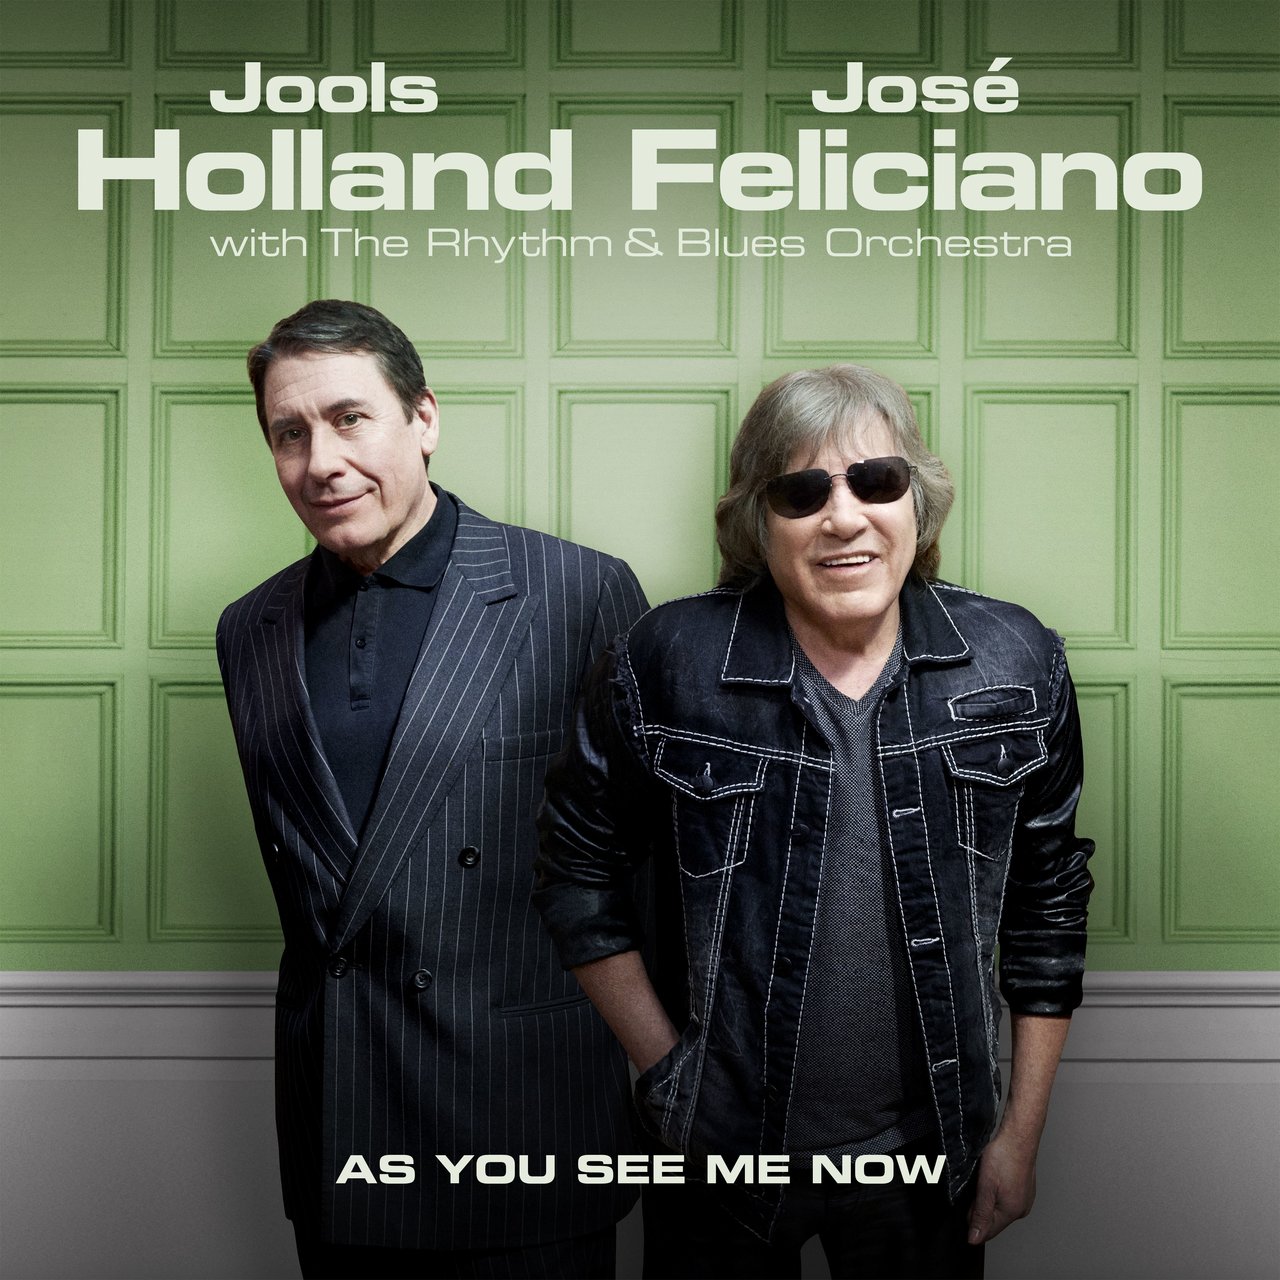 Jools Holland with José Feliciano - 2017 - As You See Me Now [MQA]